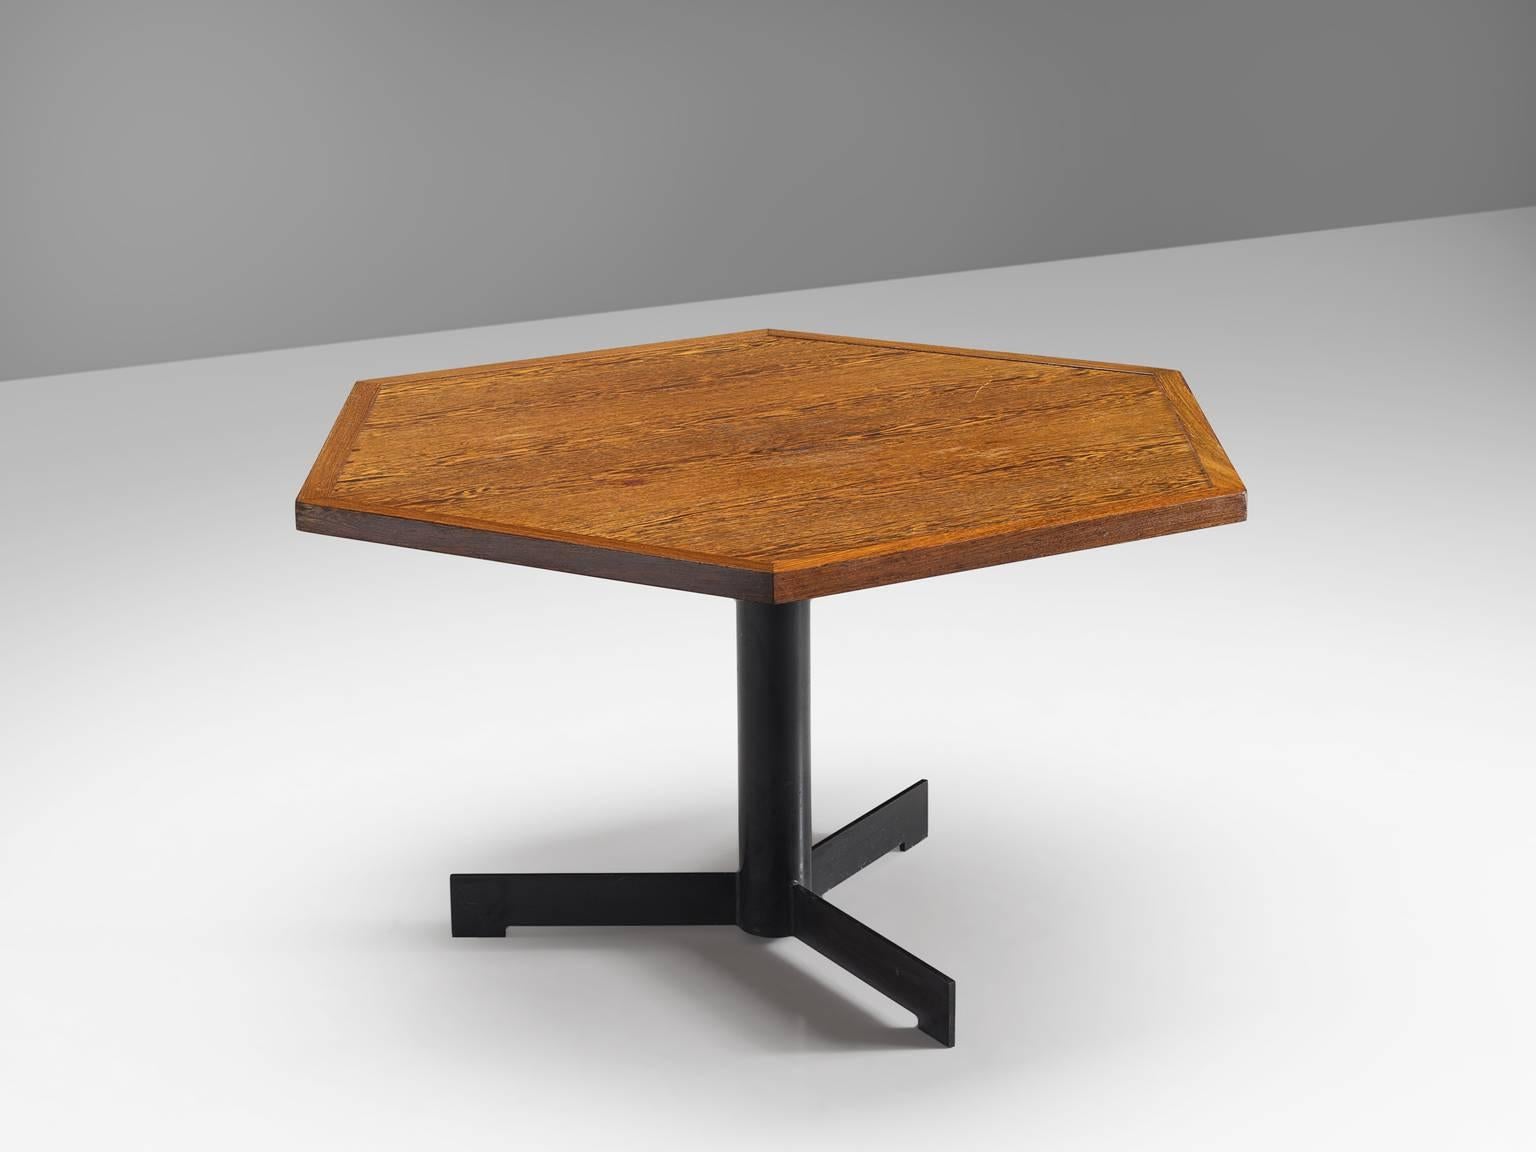 Dining table, wood, steel, Belgium, circa 1960

This sturdy and original hexagonal table features a rimmed top and a black coated pedestal leg. The leg has three feet. The design is robust and playful and is something that is most likely custom-made.